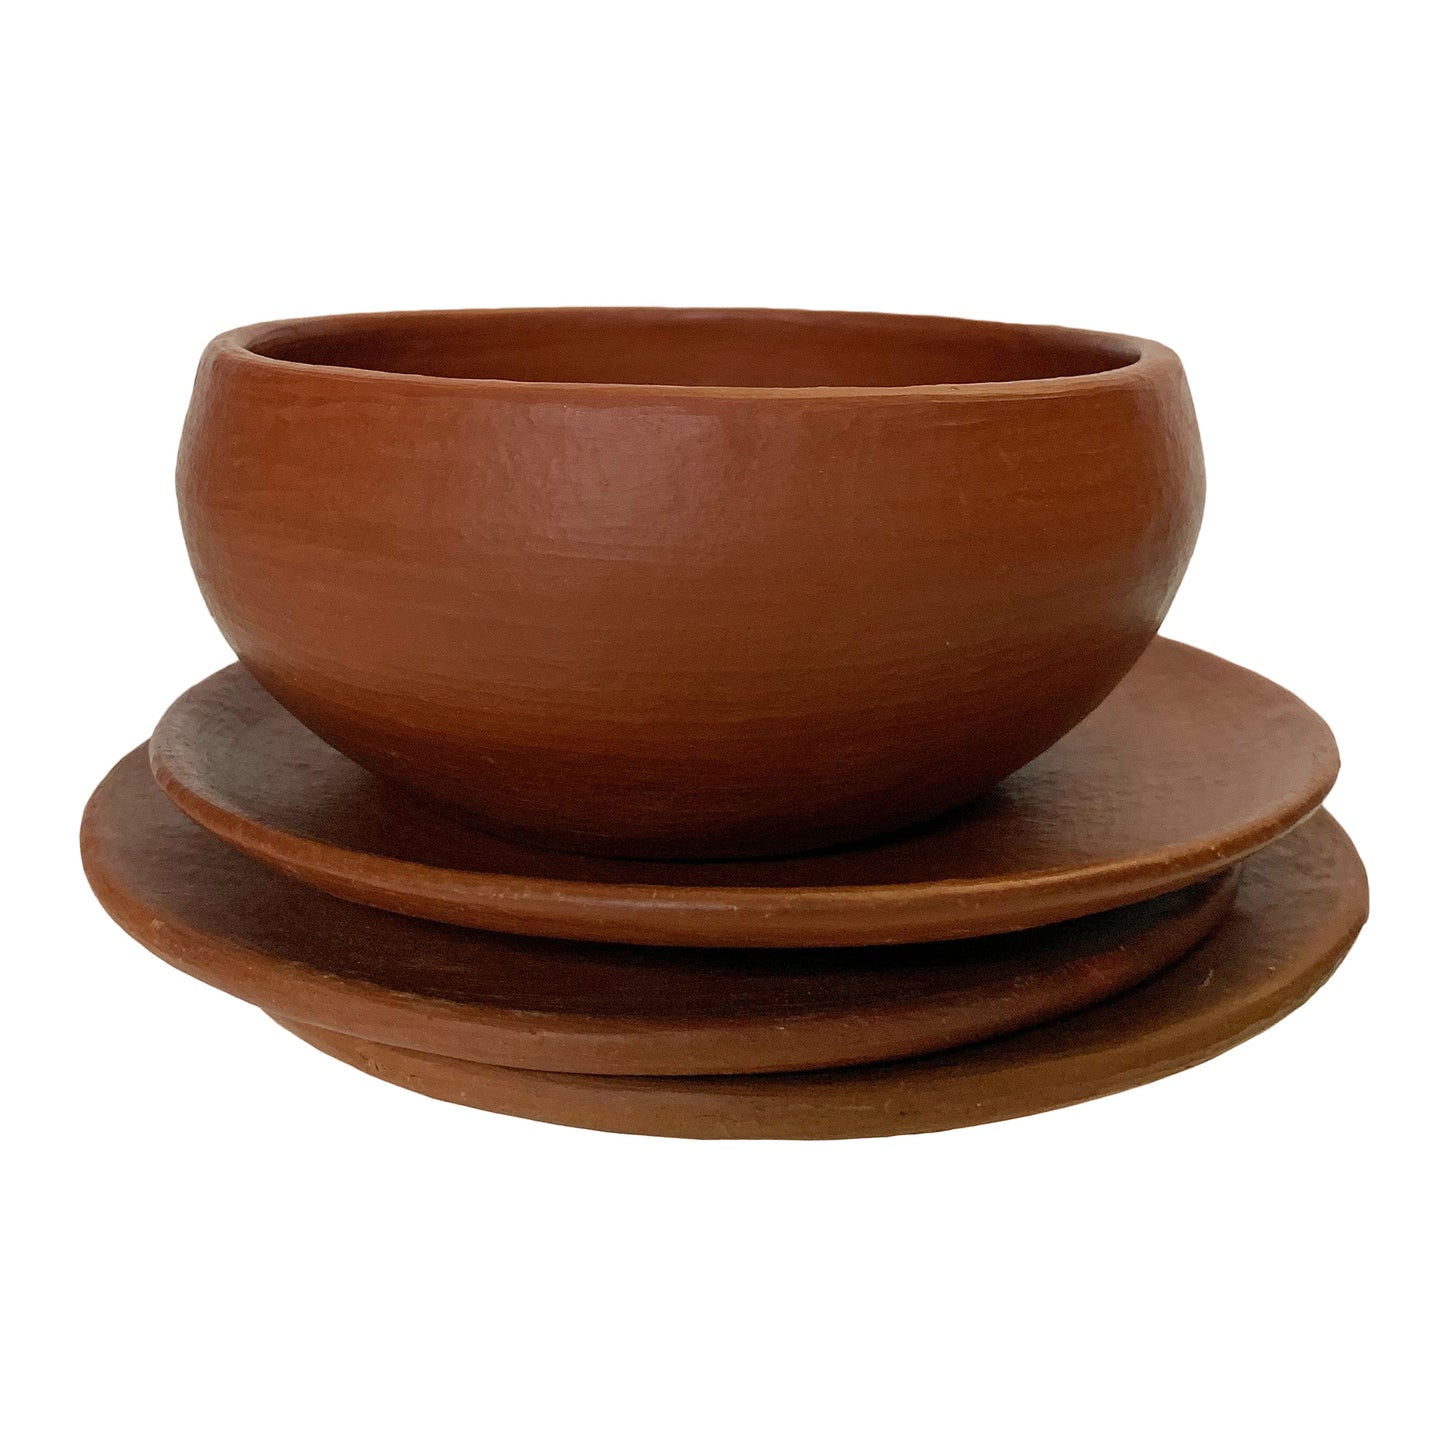 Red Clay Artisan Bowls and Plates Handmade in Oaxaca, Mexico